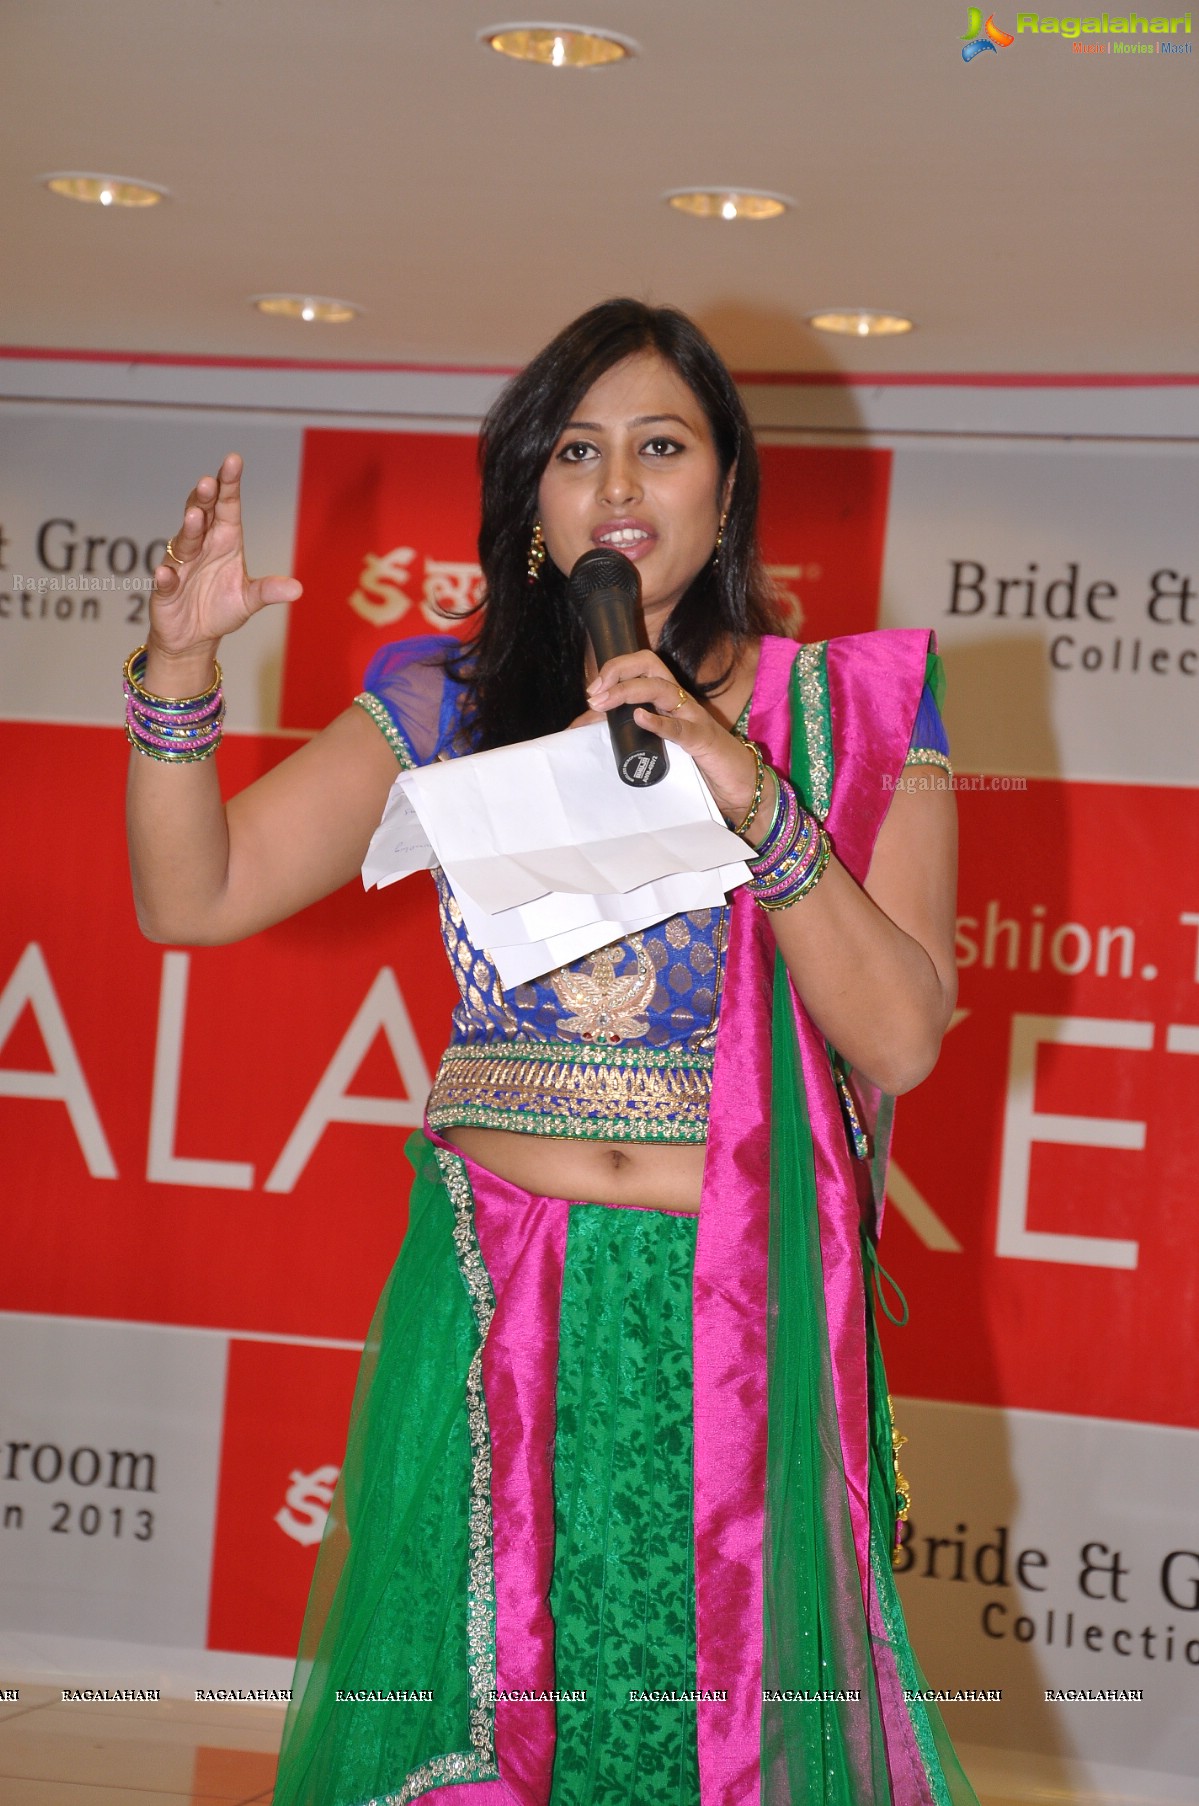 Kalanikethan Bride & Groom Collection 2013 Launch